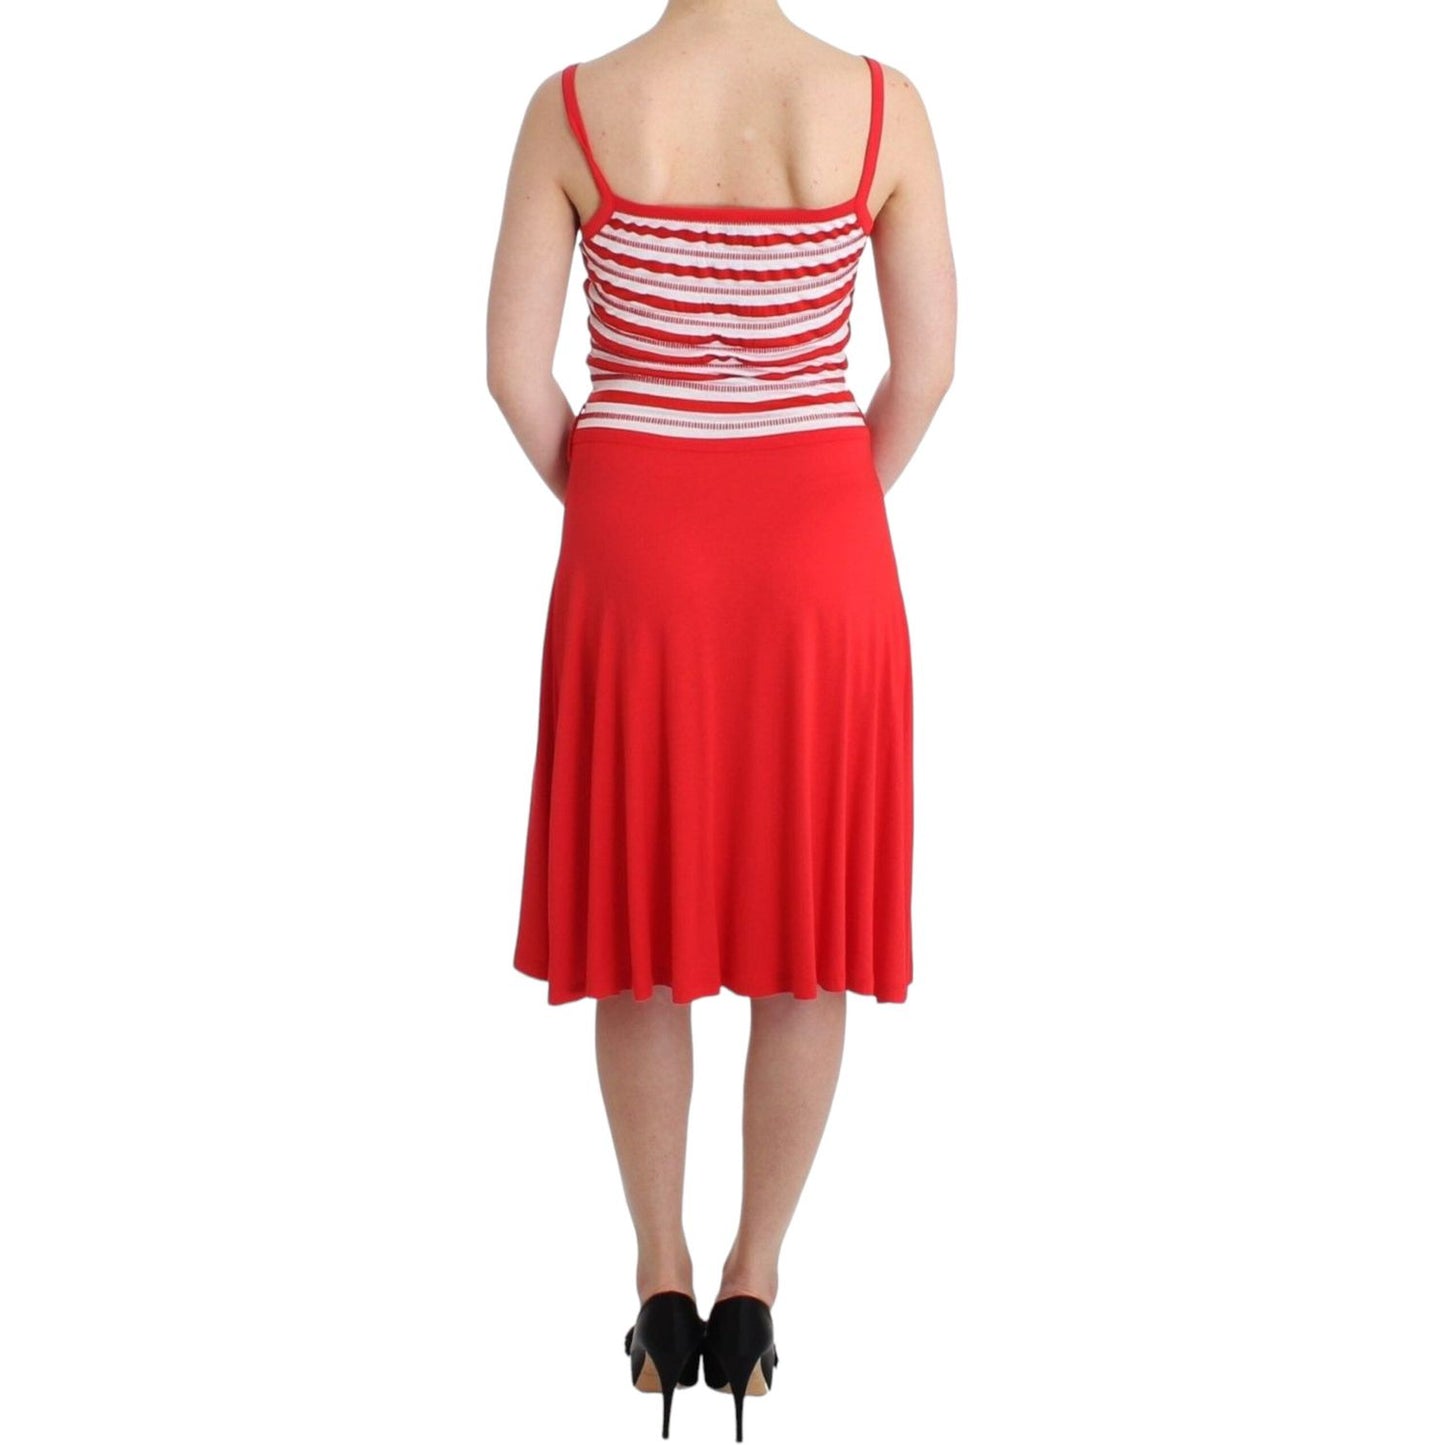 Roccobarocco Red striped jersey A-line dress red-striped-jersey-a-line-dress 2781-white-sheath-dress-2-1-scaled-c11ebfef-8a1.jpg